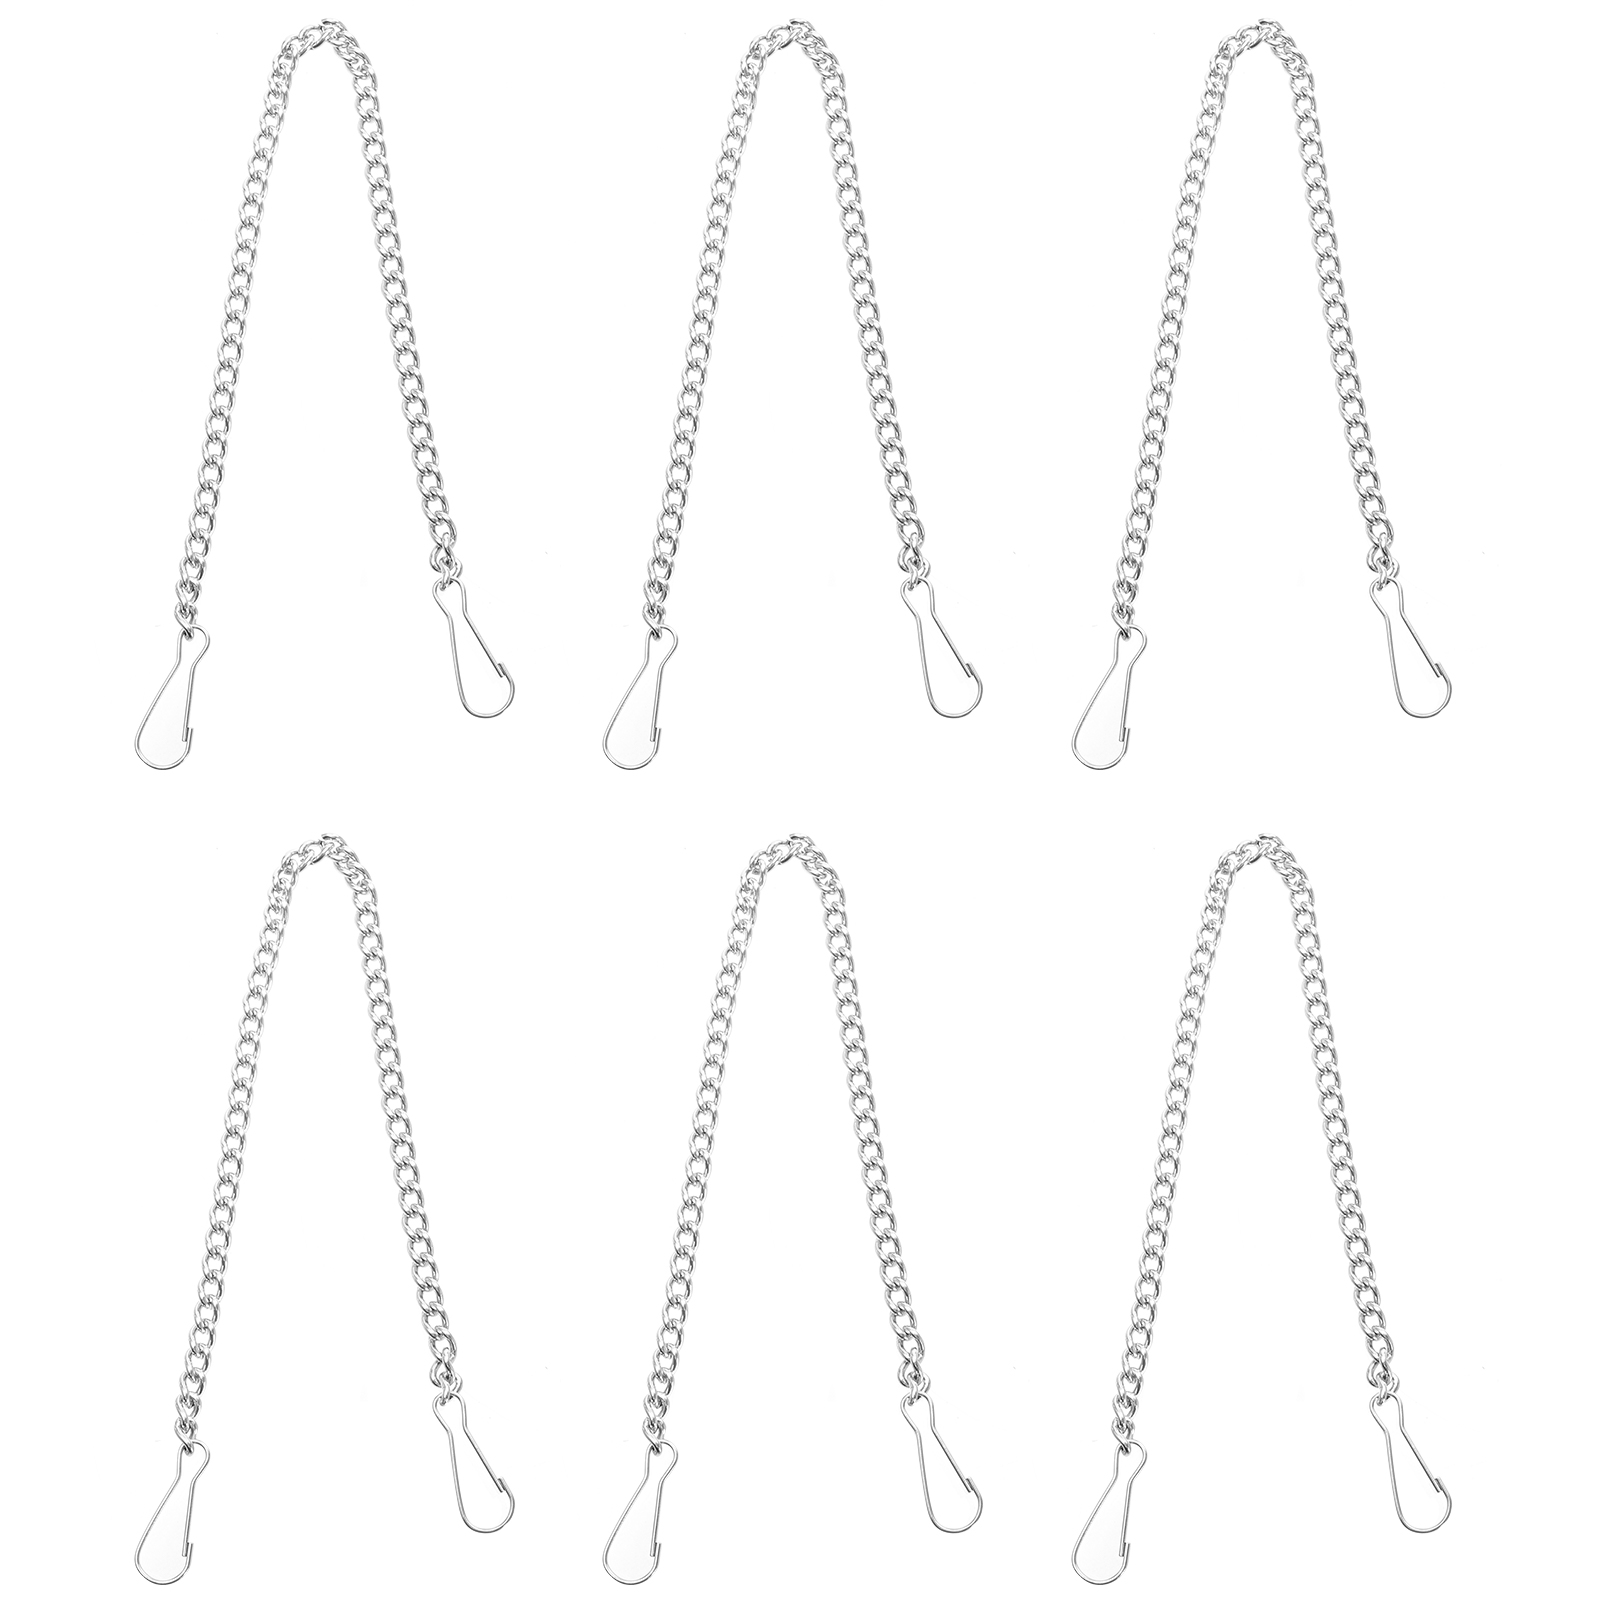 6pcs Toilet Flapper Chain Replacement Stainless Steel Toilet Handle Lift Chains